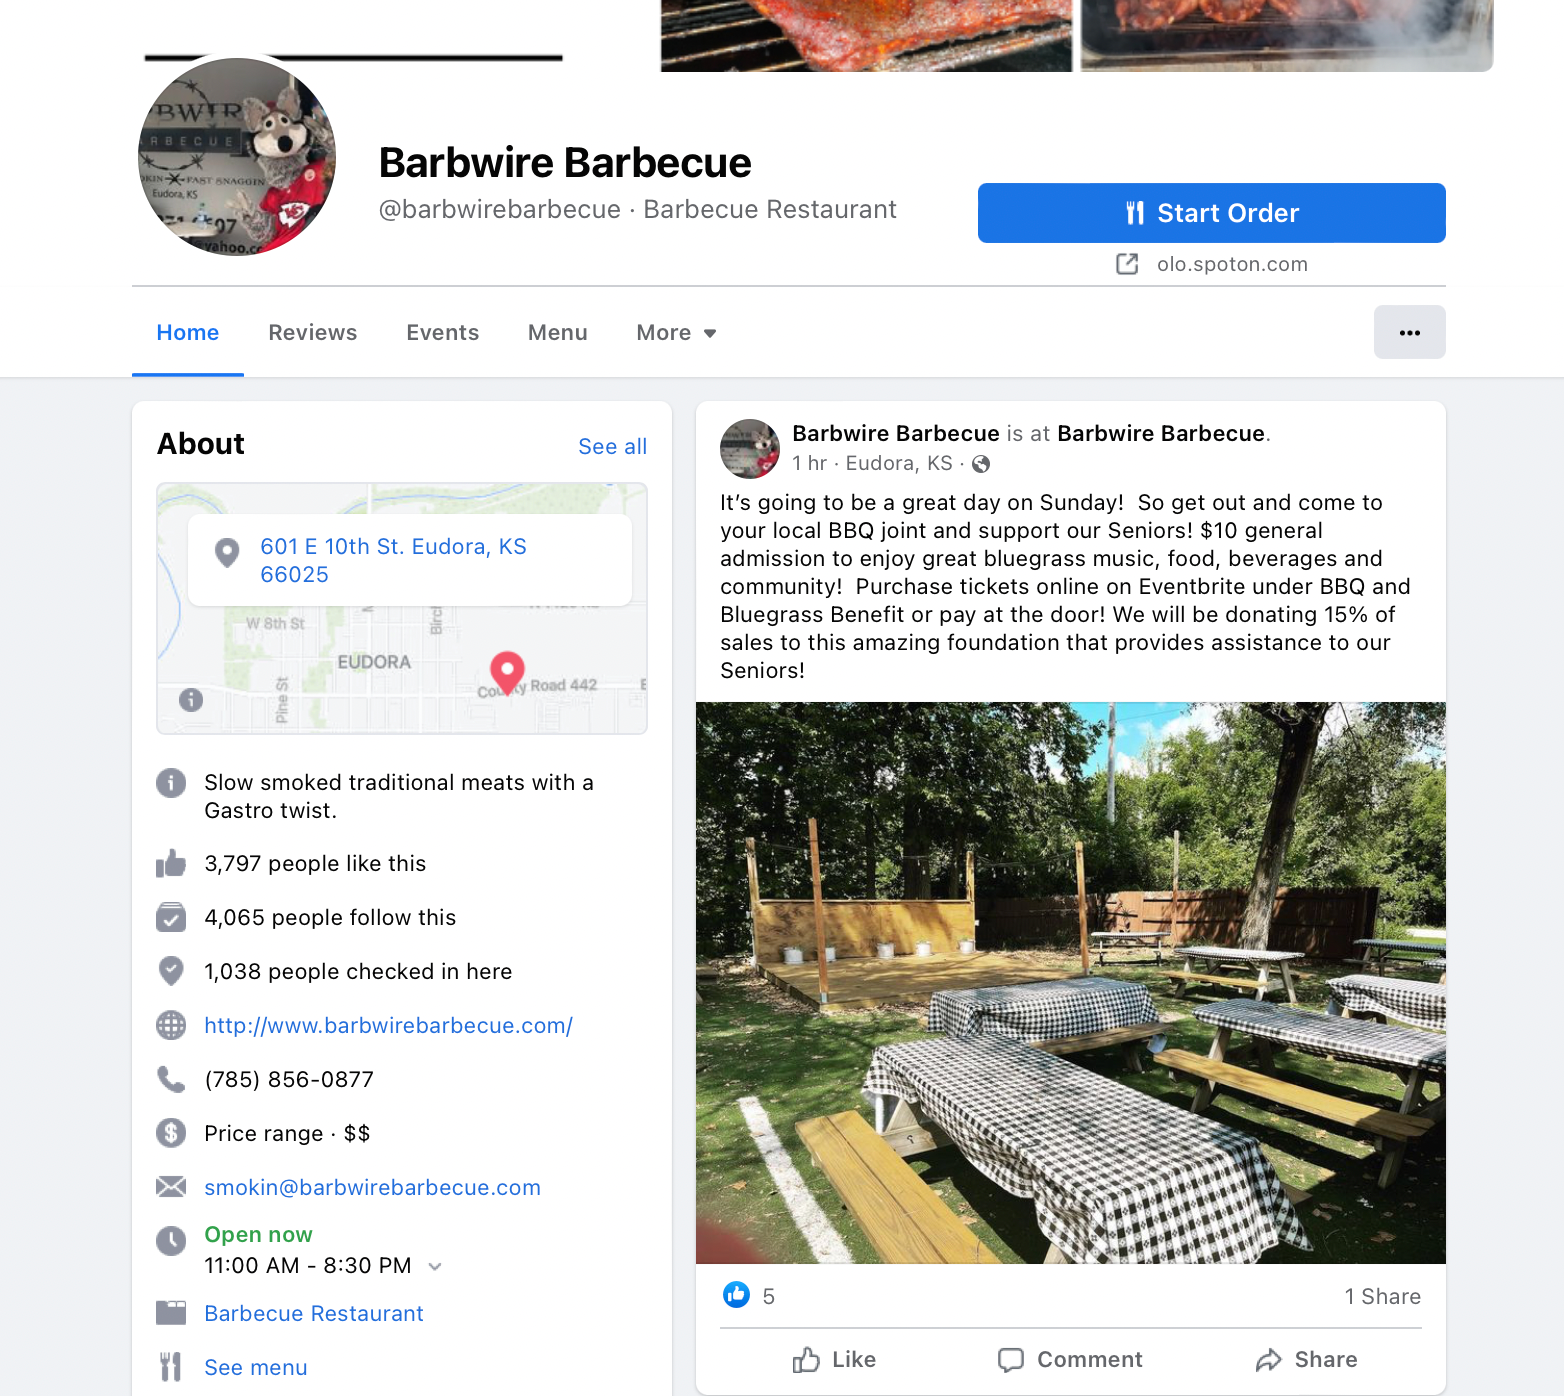 Barbwire Barbecue business hours, map, and other details on Facebook page.